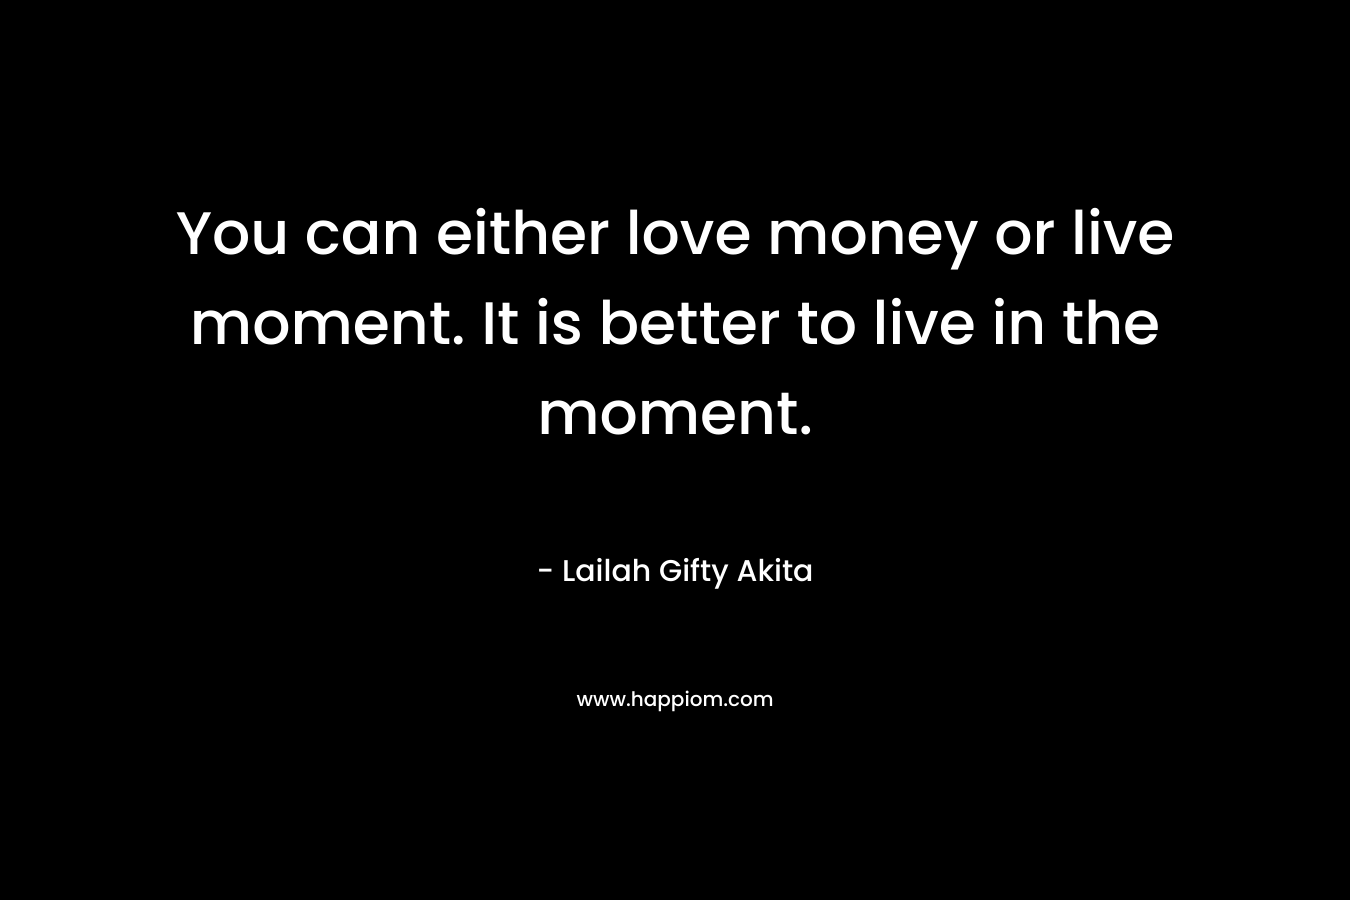 You can either love money or live moment. It is better to live in the moment.